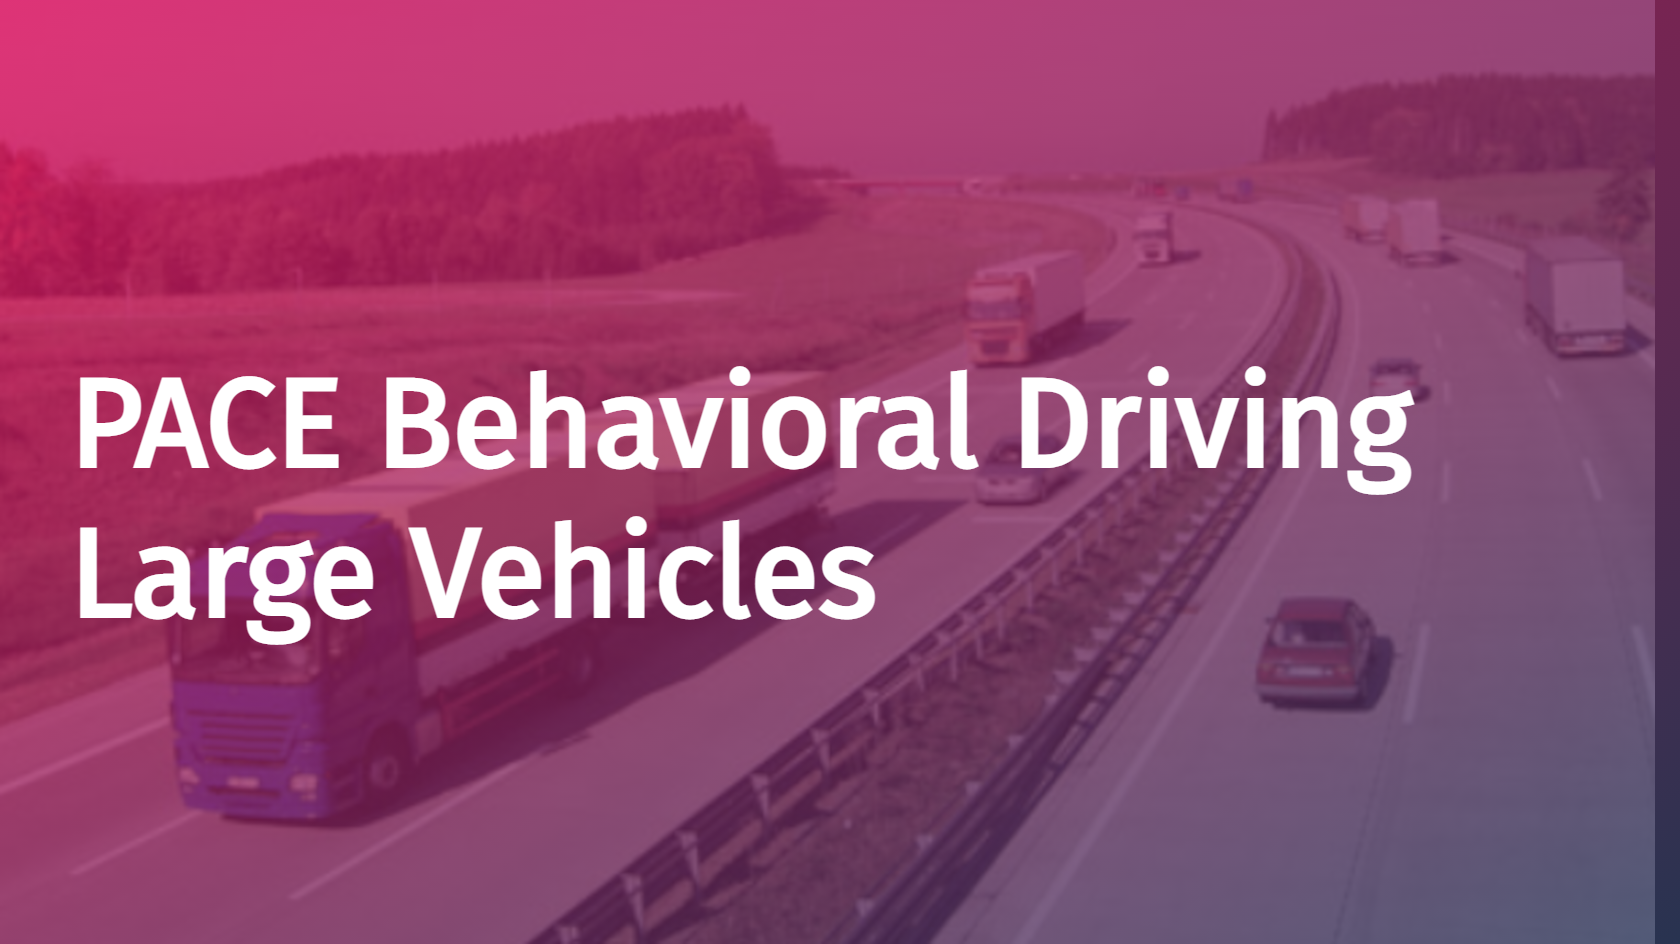 PACE Behavioral Driving Large Vehicles